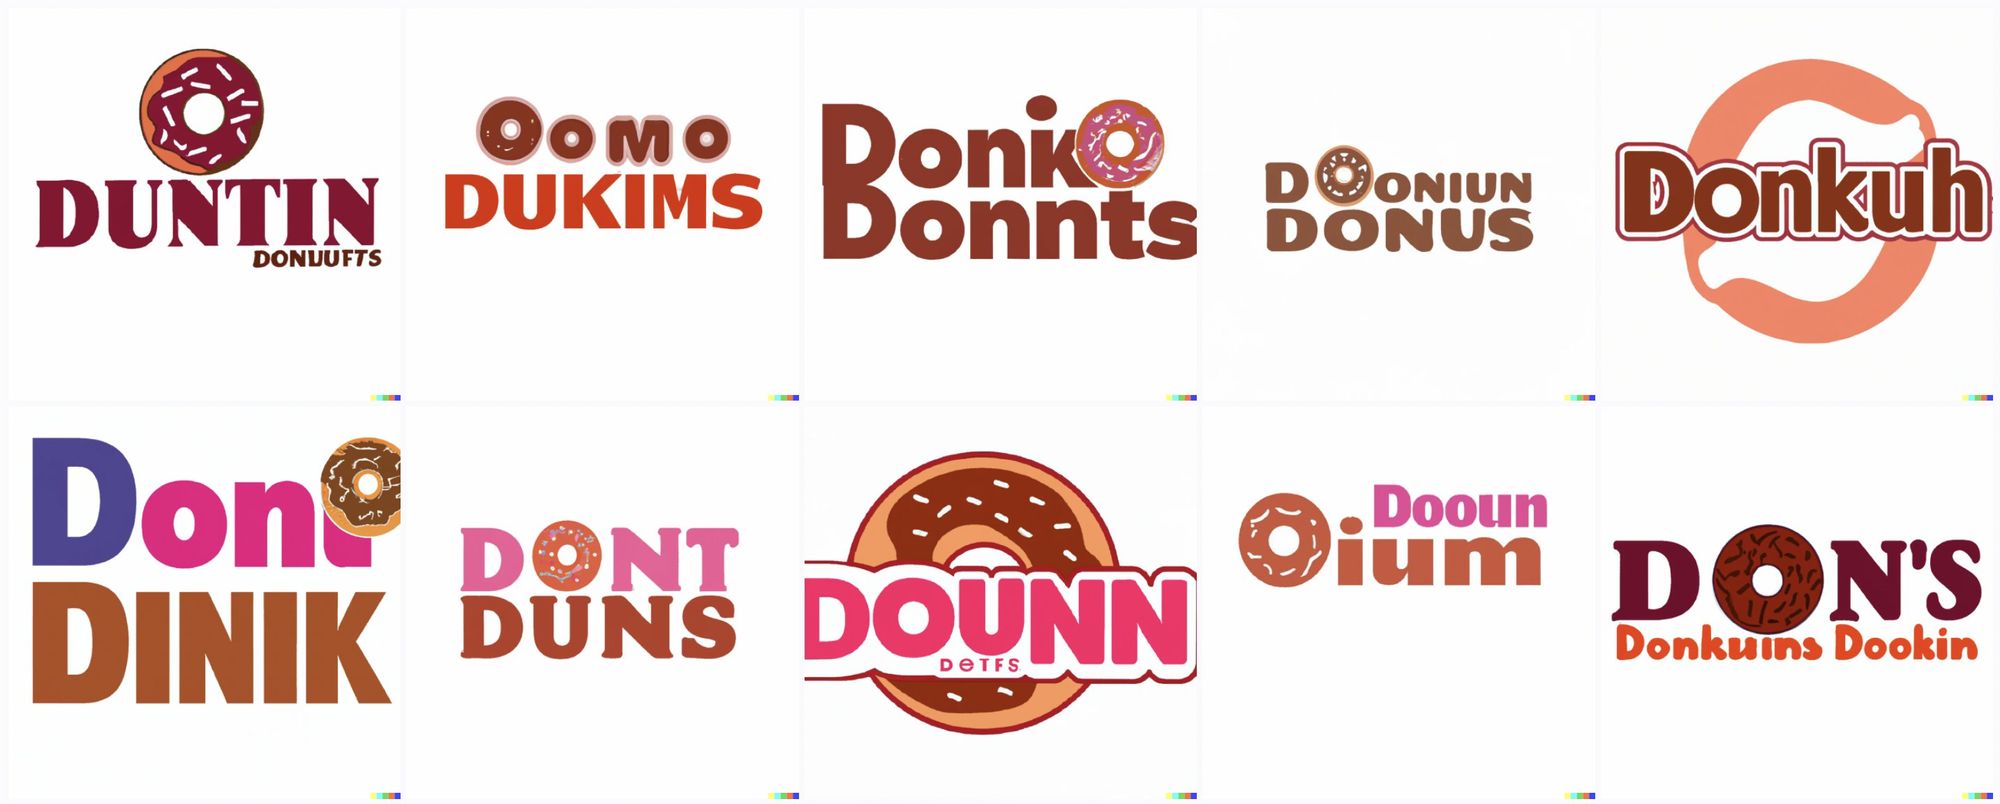 Logos, each of which involves at least one donut image. They are variations on "Duntin Donuufts", "Oomo Dukims", "Doinko Donnts", "Dont Duns", and "Donkuh"